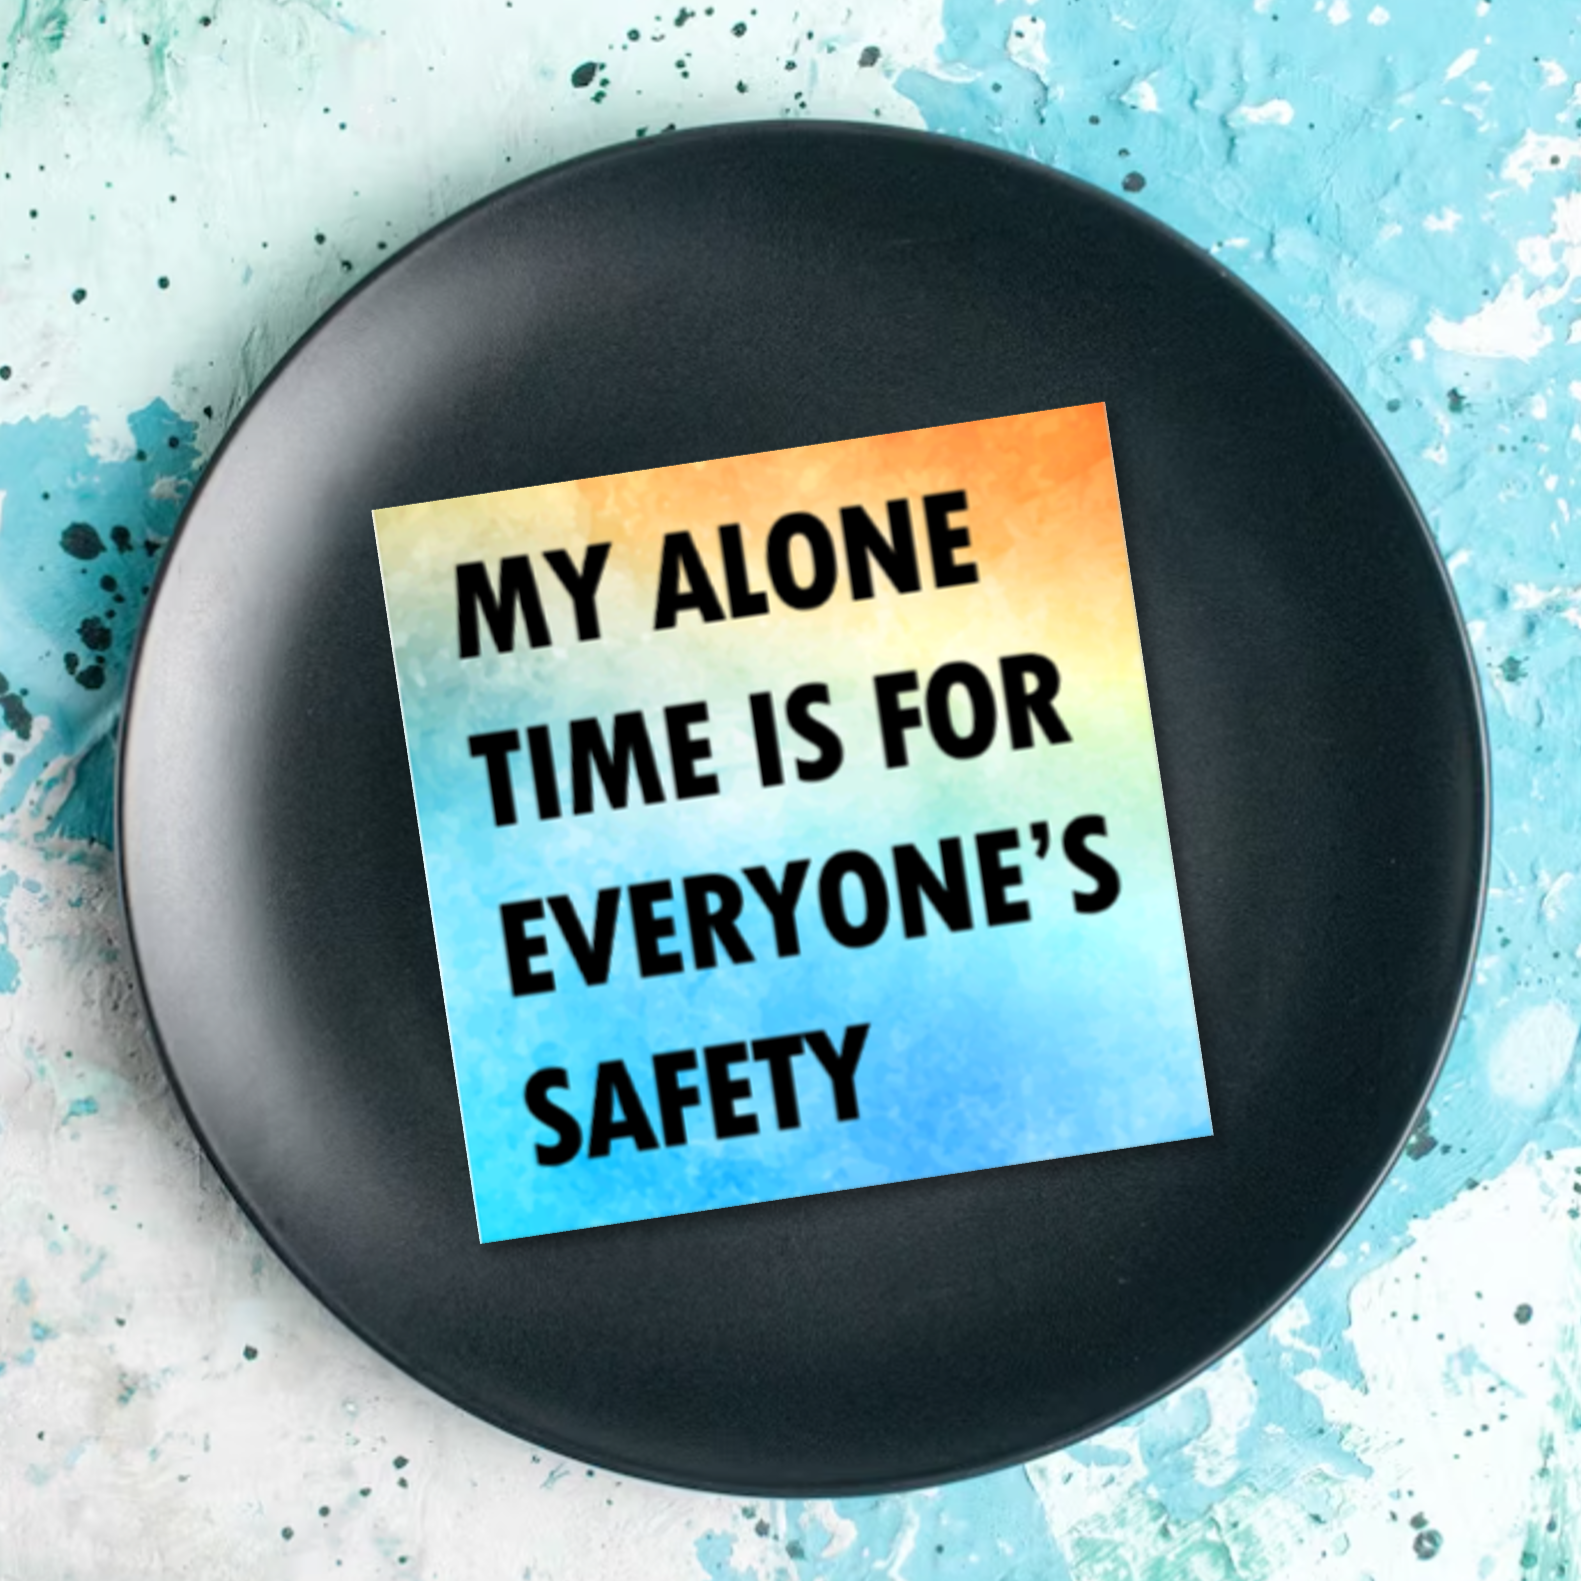 My Alone Time is for Everyone's Safety sticker